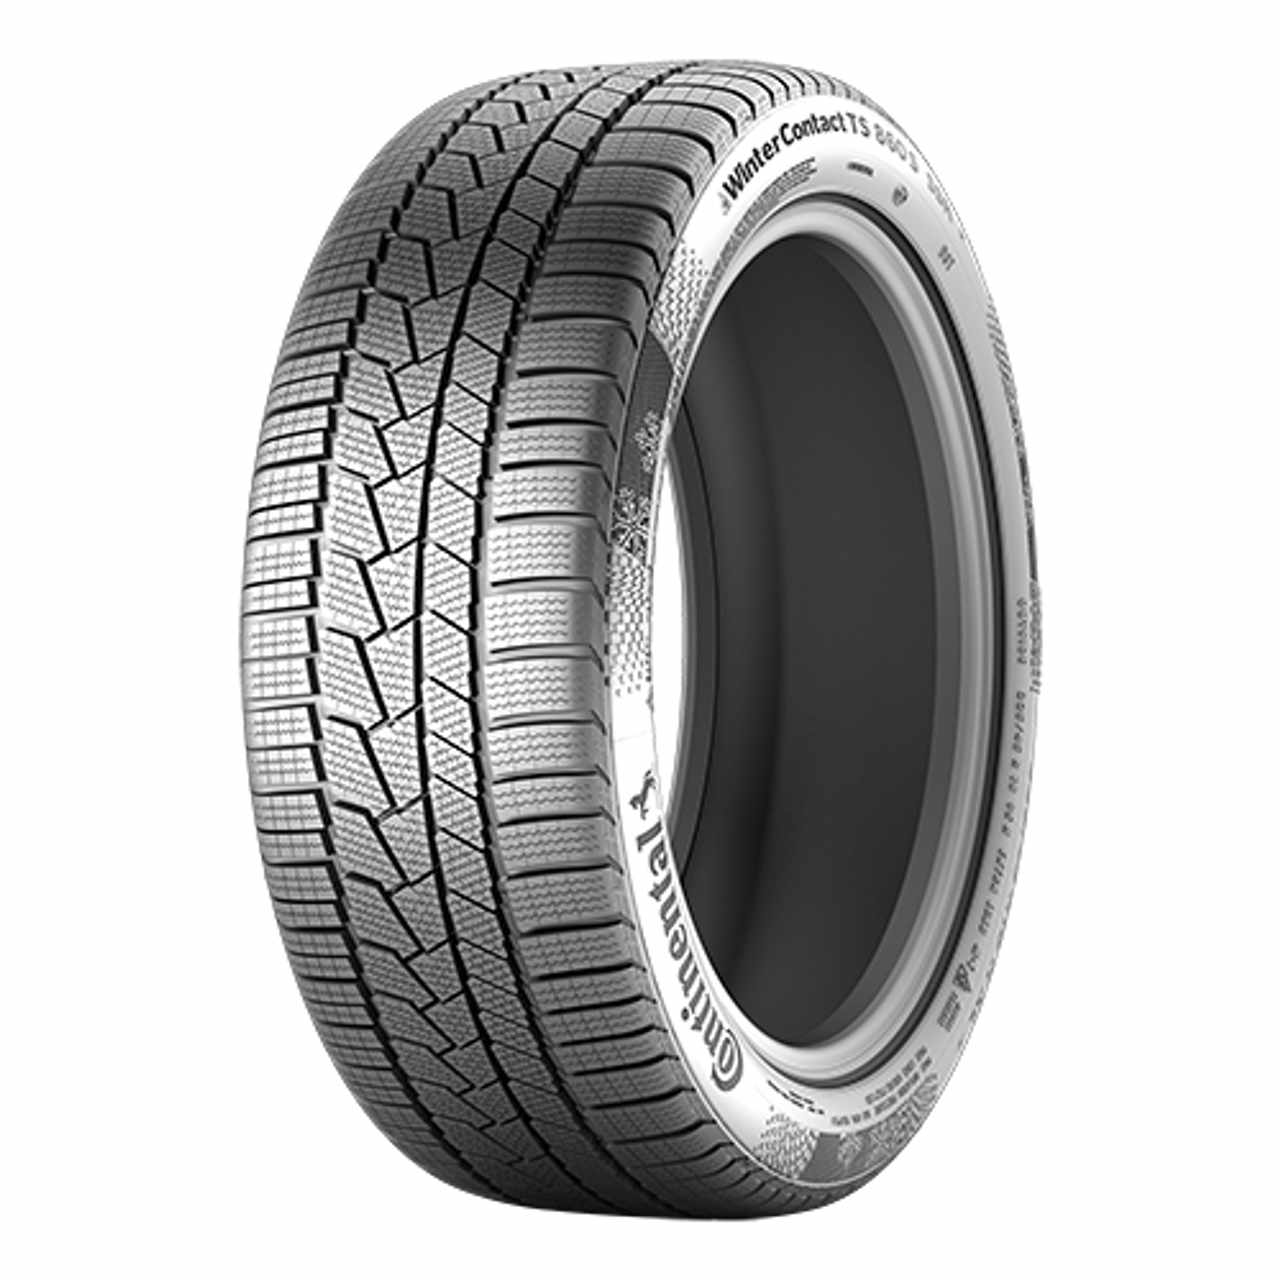 CONTINENTAL WINTERCONTACT TS 860 S (AO) (EVc) 255/40R20 101W FR BSW XL